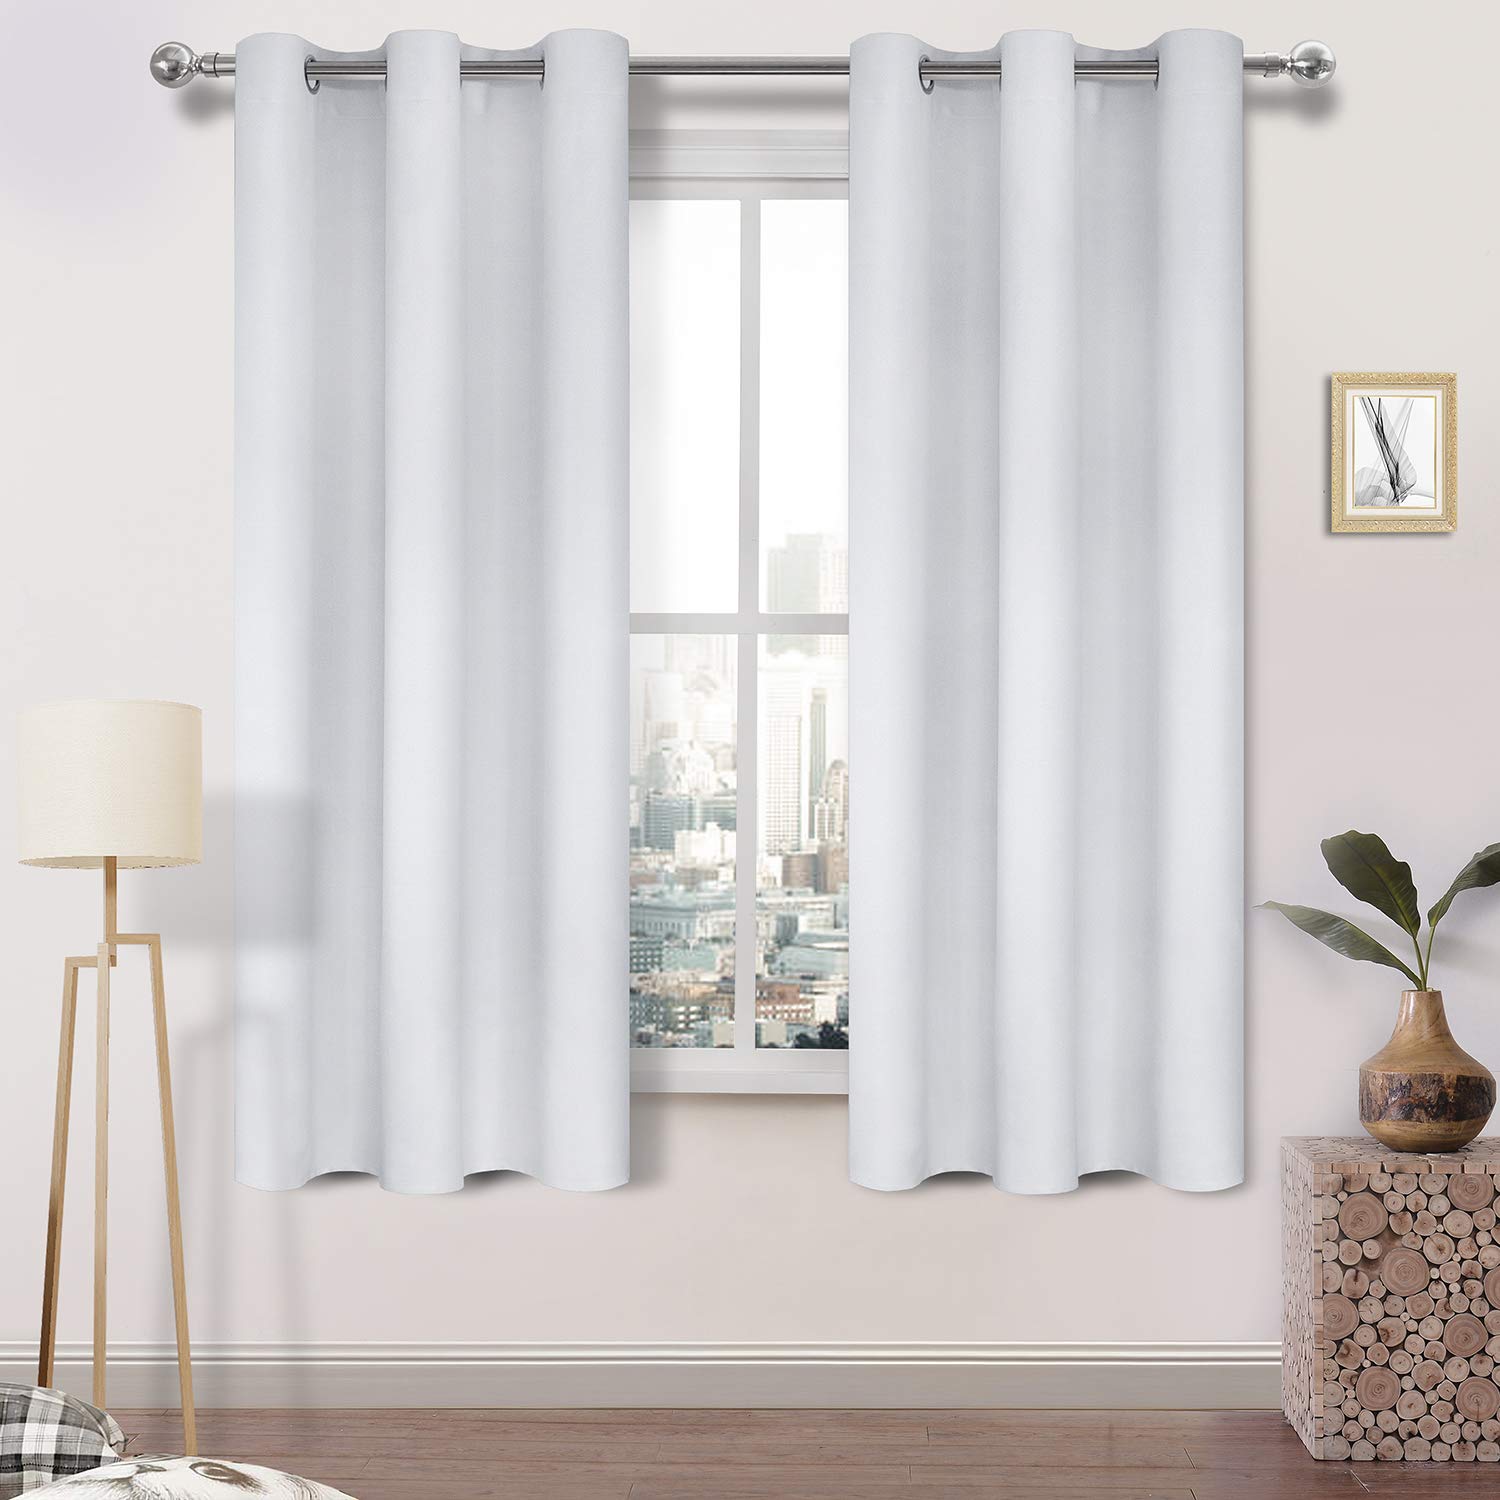 DWcN greyish White curtains for Bedroom, curtains 63 Inch Length 2 Panels, Room Darkening curtains for Living Room, Spring Therm